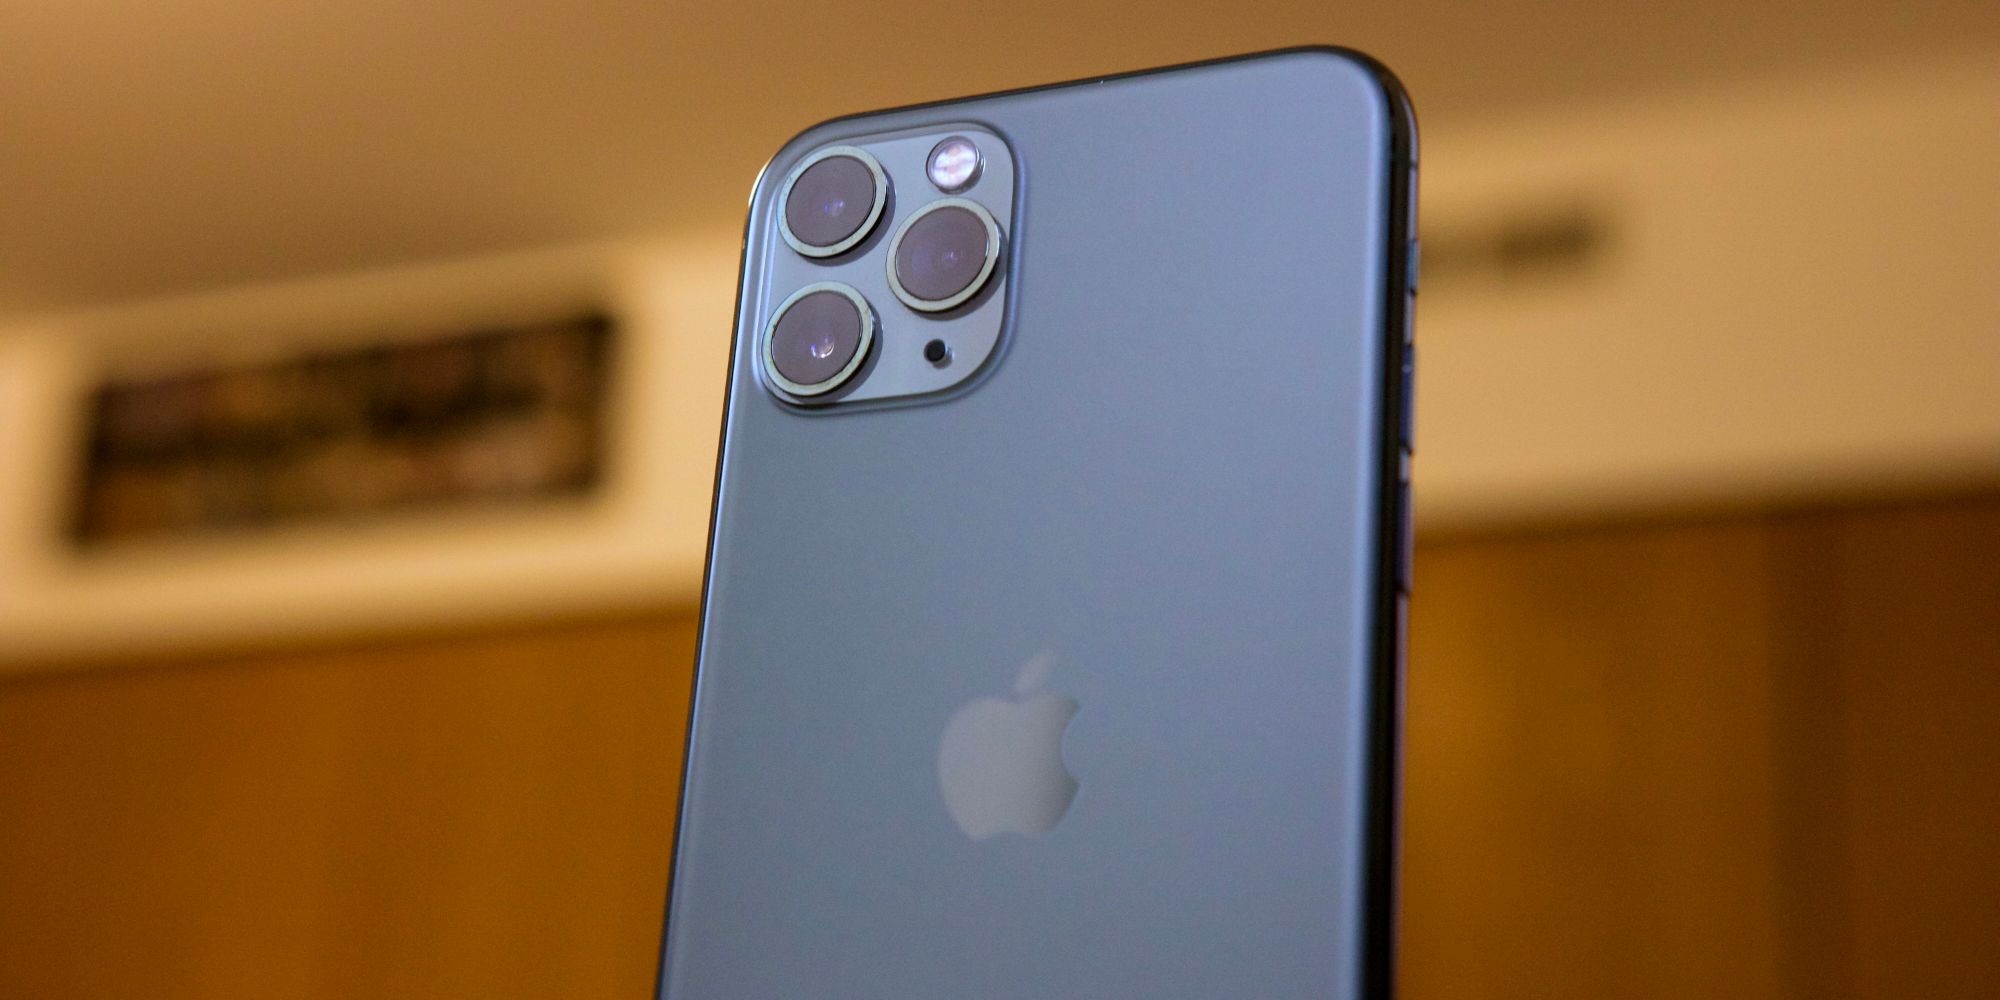 The back of an iPhone 11 Pro